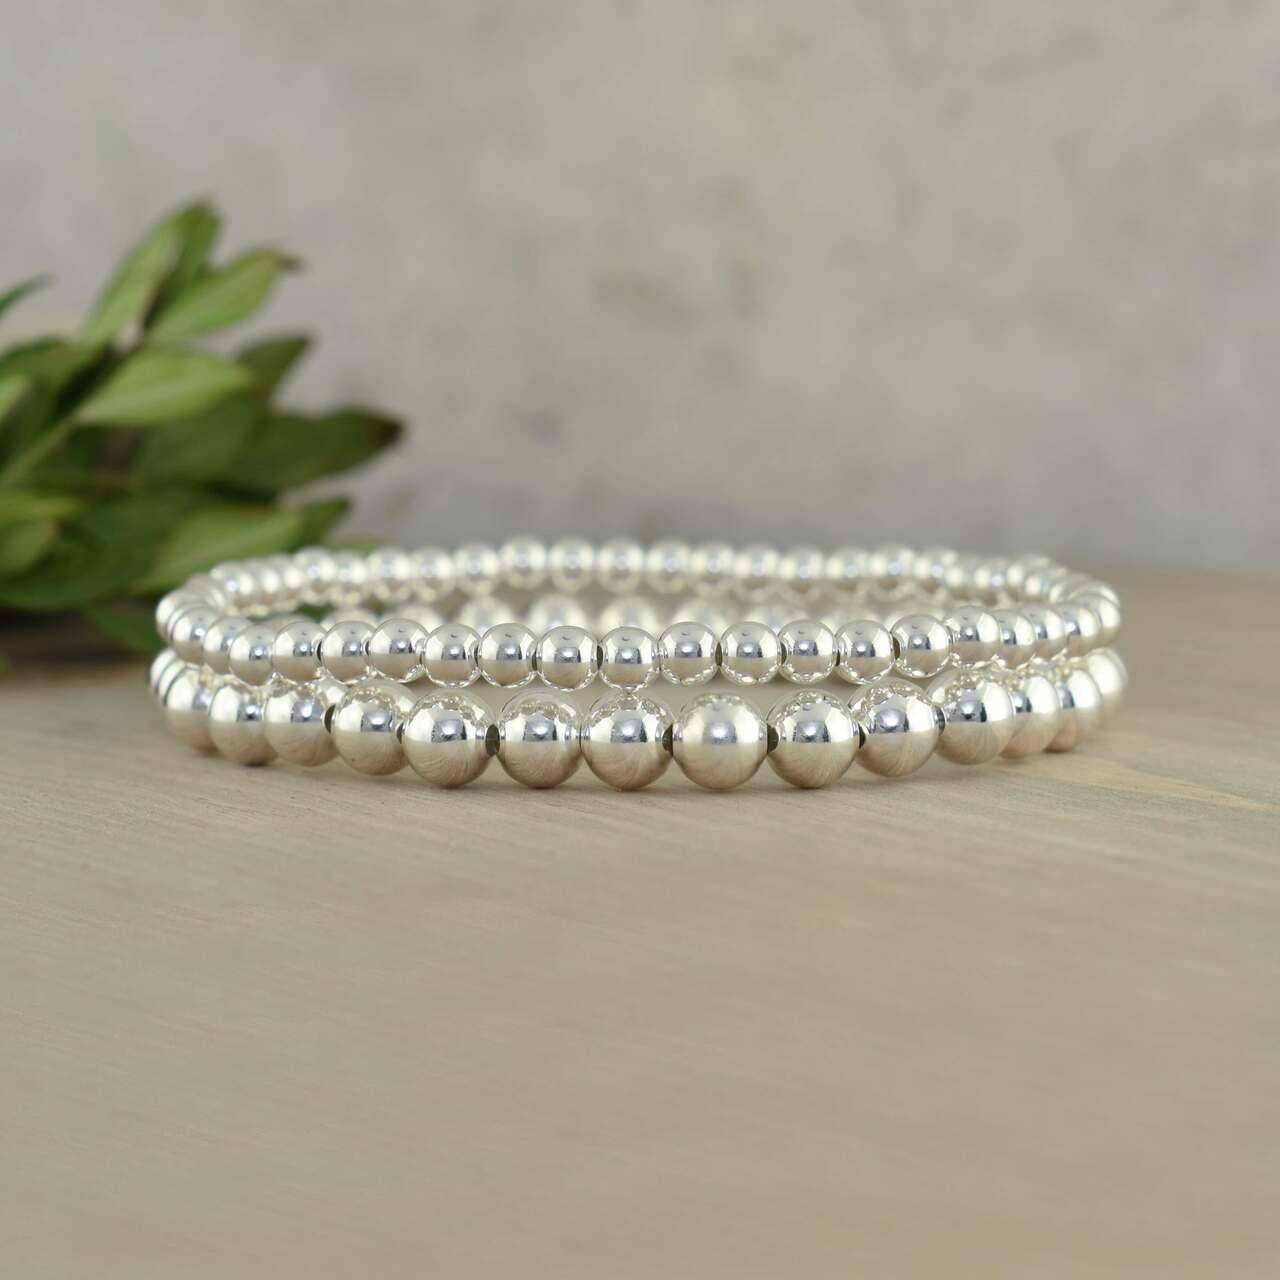 Beaded Stack Bracelets featured in 4mm and 6mm bead sizes